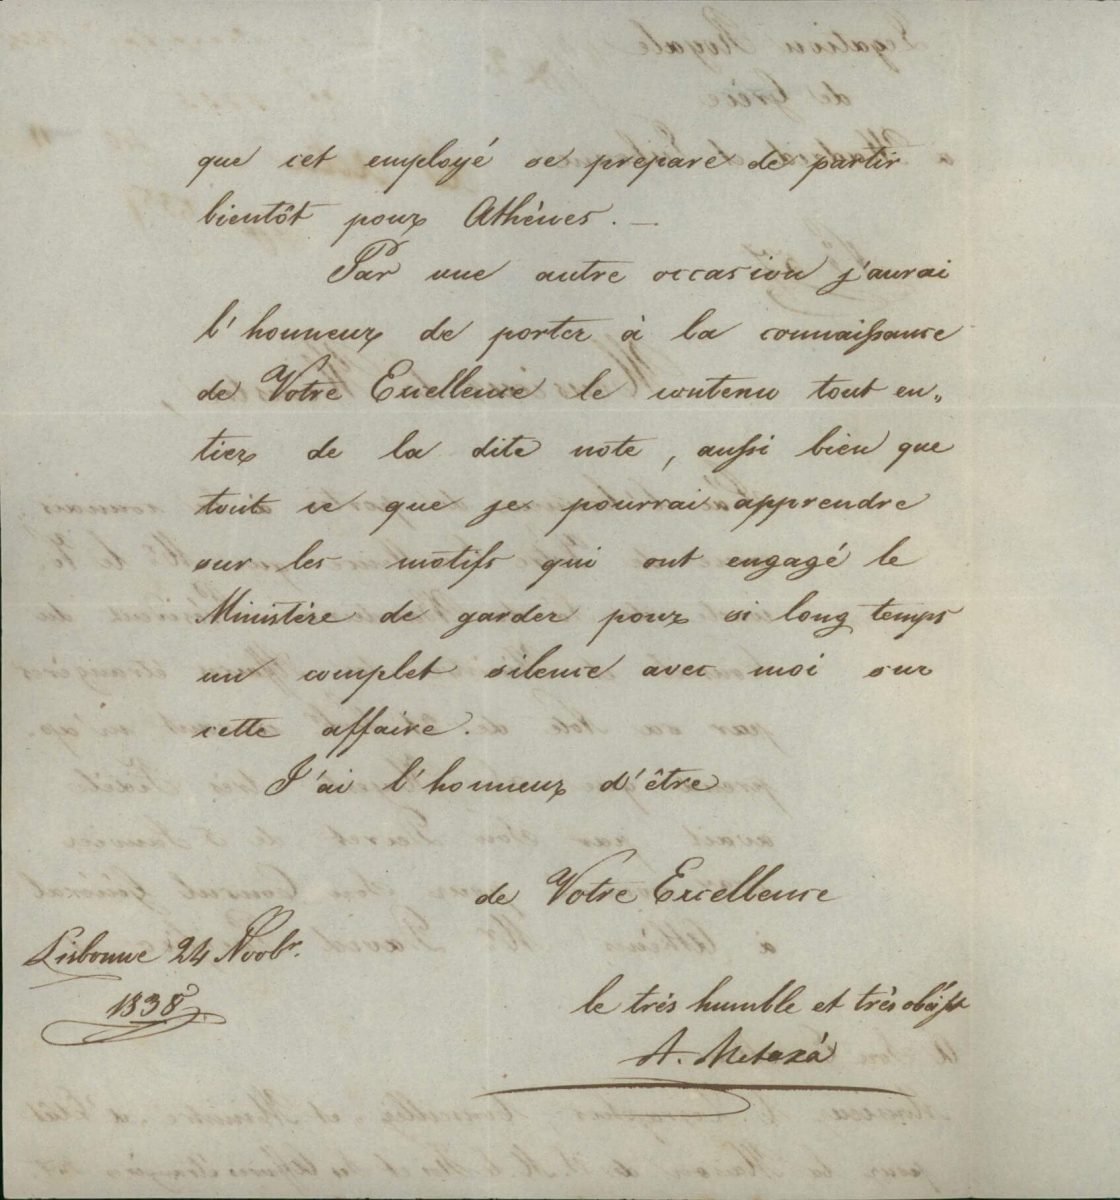 Greek Ambassador in Madrid and Lisbon Α. Metaxas informs the Ministry of Foreign Affairs that the Portuguese Government issued a Decree in 5 January 1837 appointing David Pacifico as Consul General of Portugal in Athens Page 2